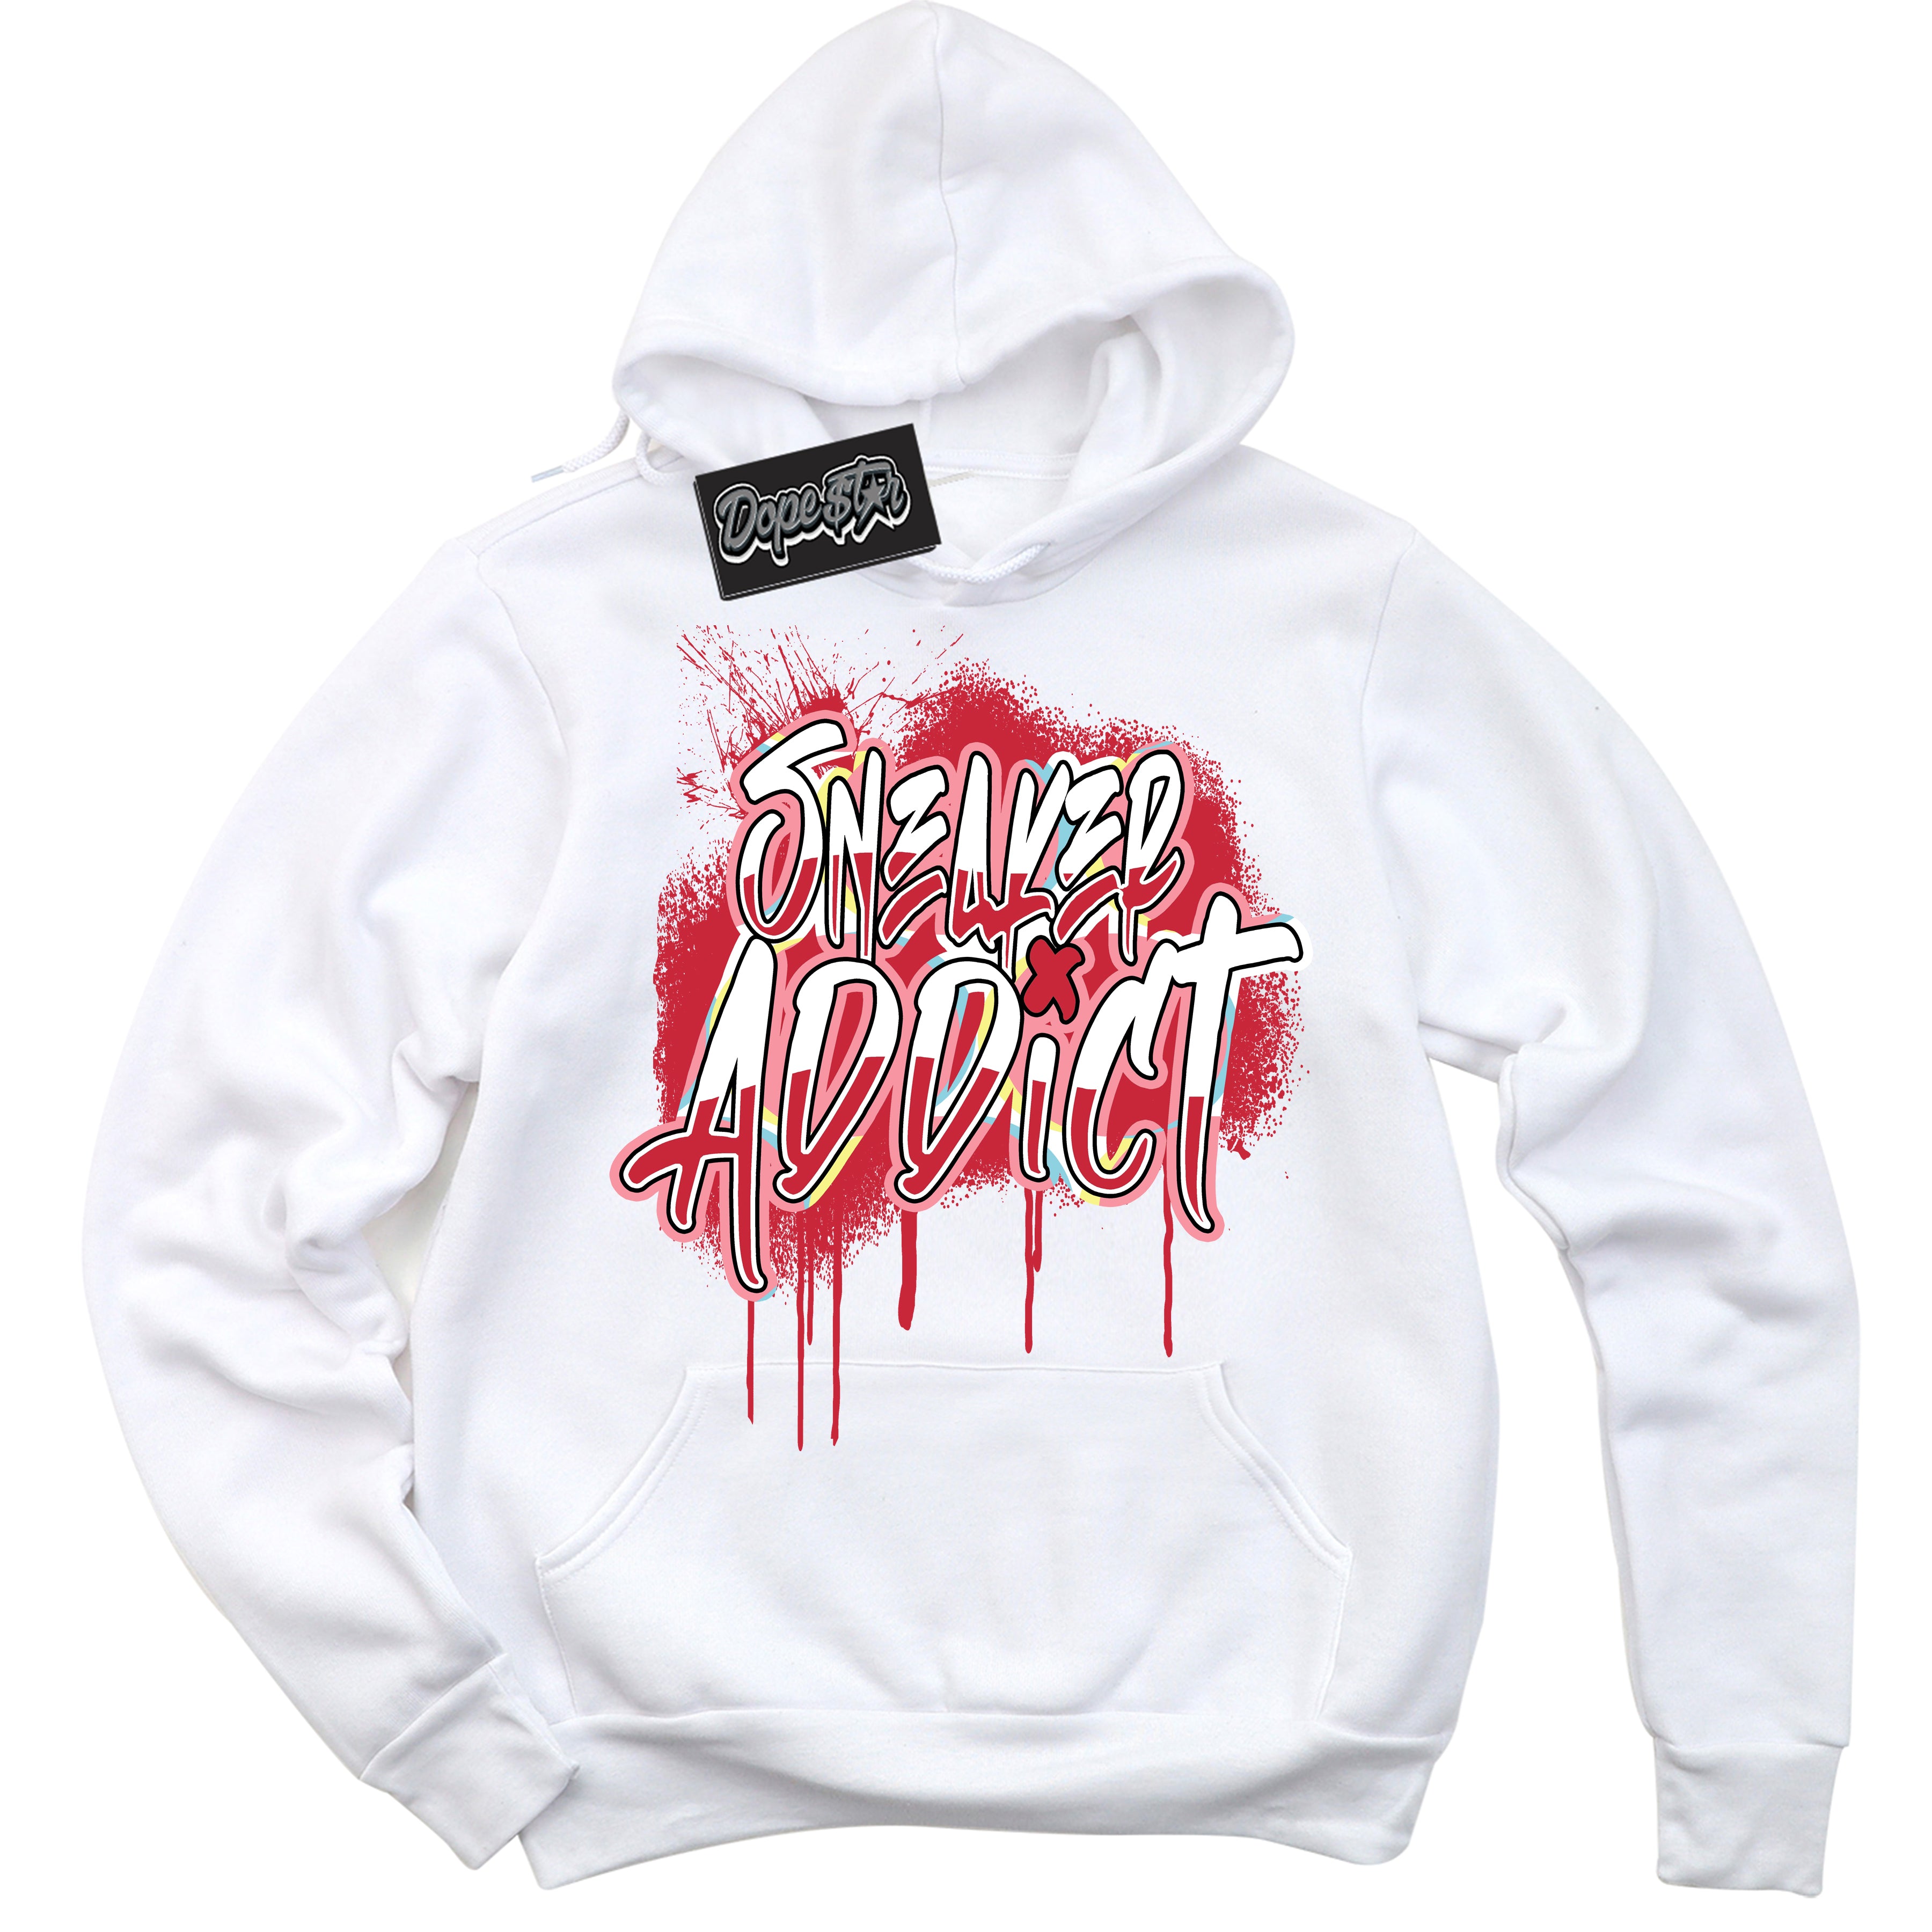 Cool White Graphic DopeStar Hoodie with “ Sneaker Addict “ print, that perfectly matches Spider-Verse 1s sneakers